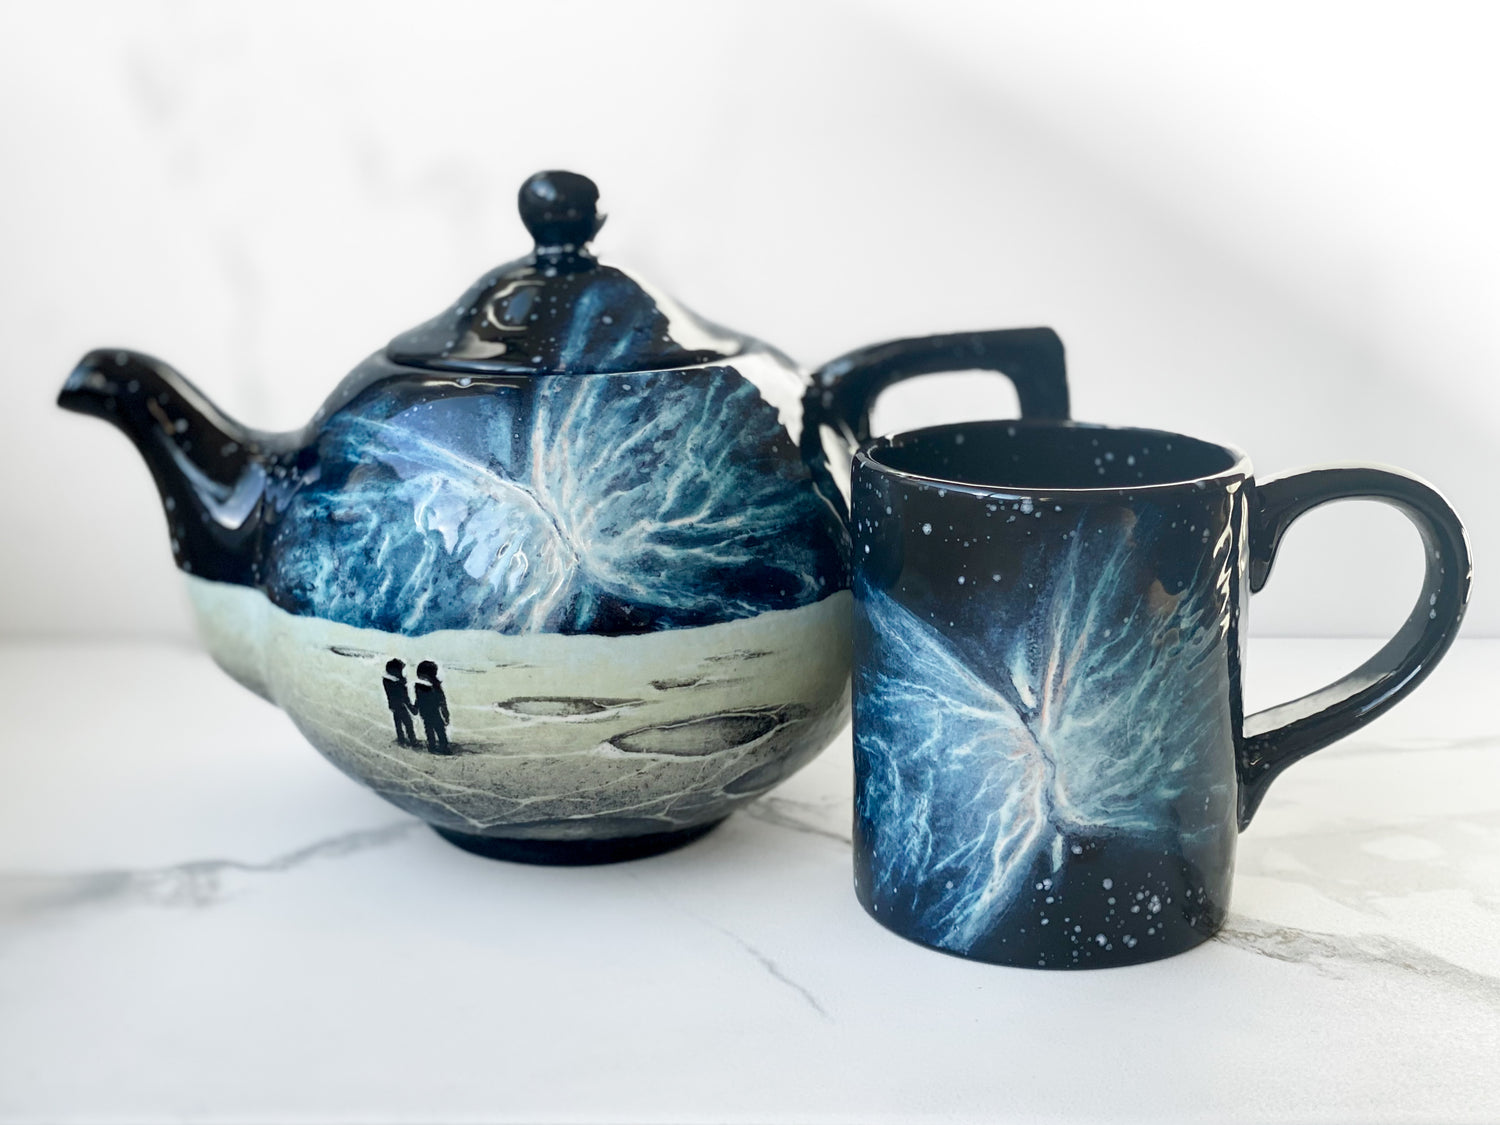 Teapot and Mug featuring the Butterfly Nebula. Teapot features cratered landscape below nebula with two astronauts holding hands.